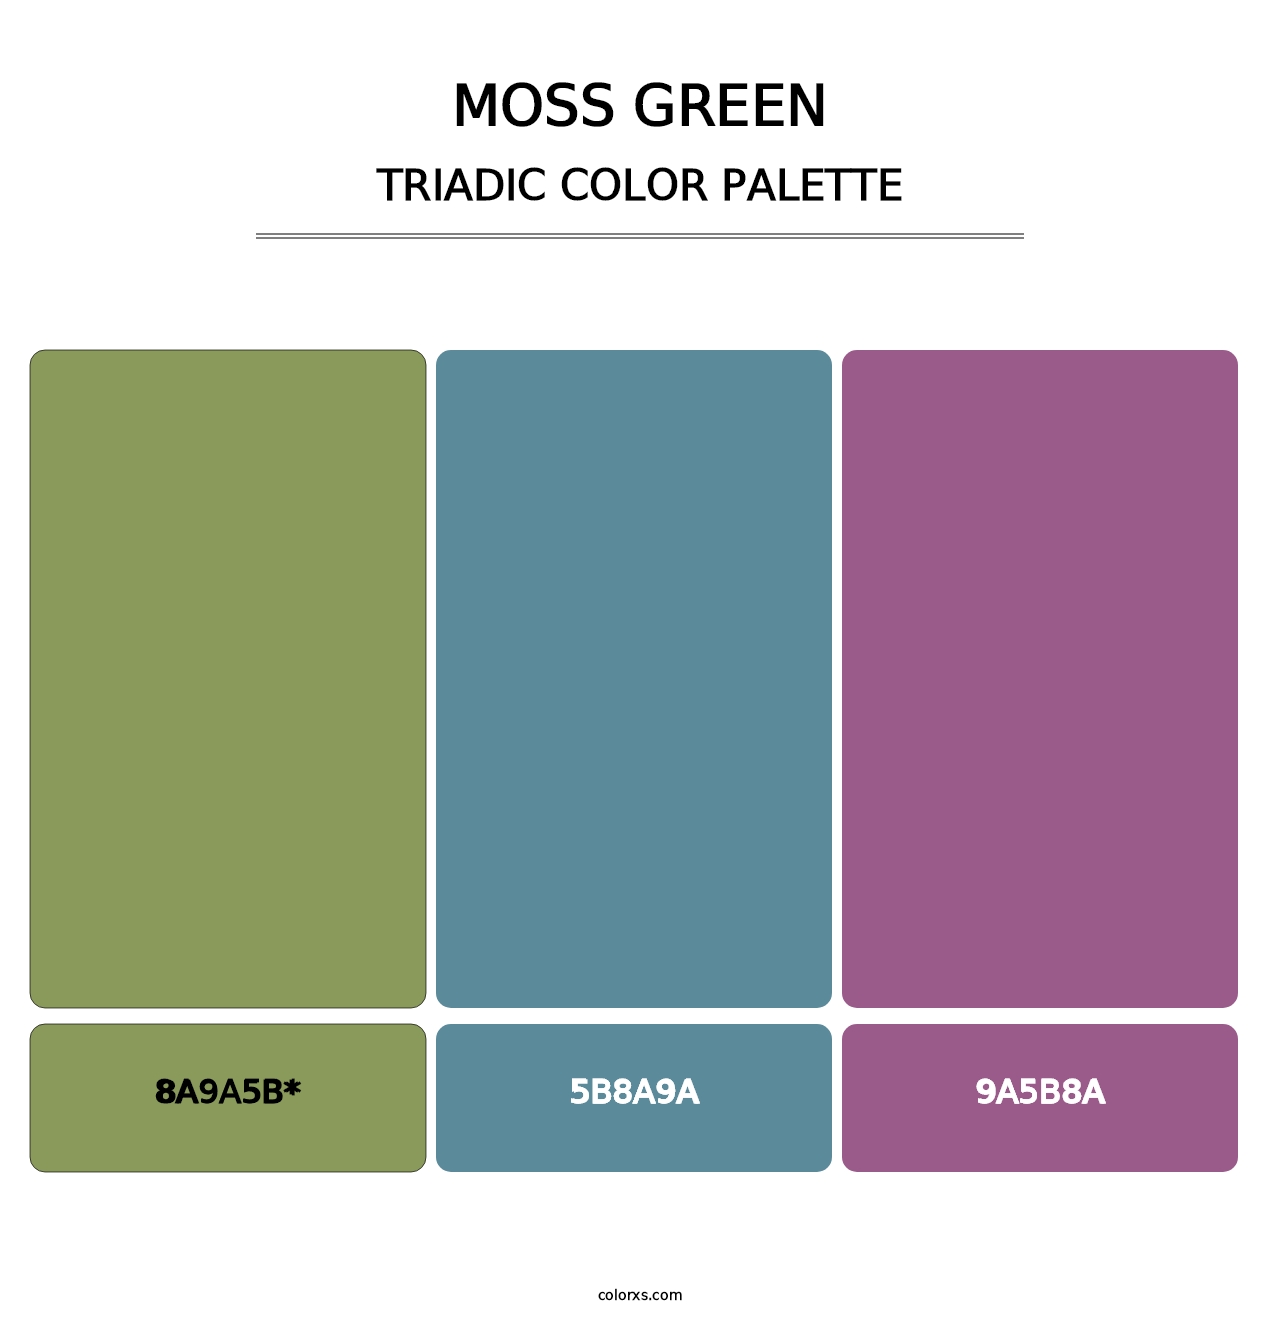 Moss Green - Triadic Color Palette